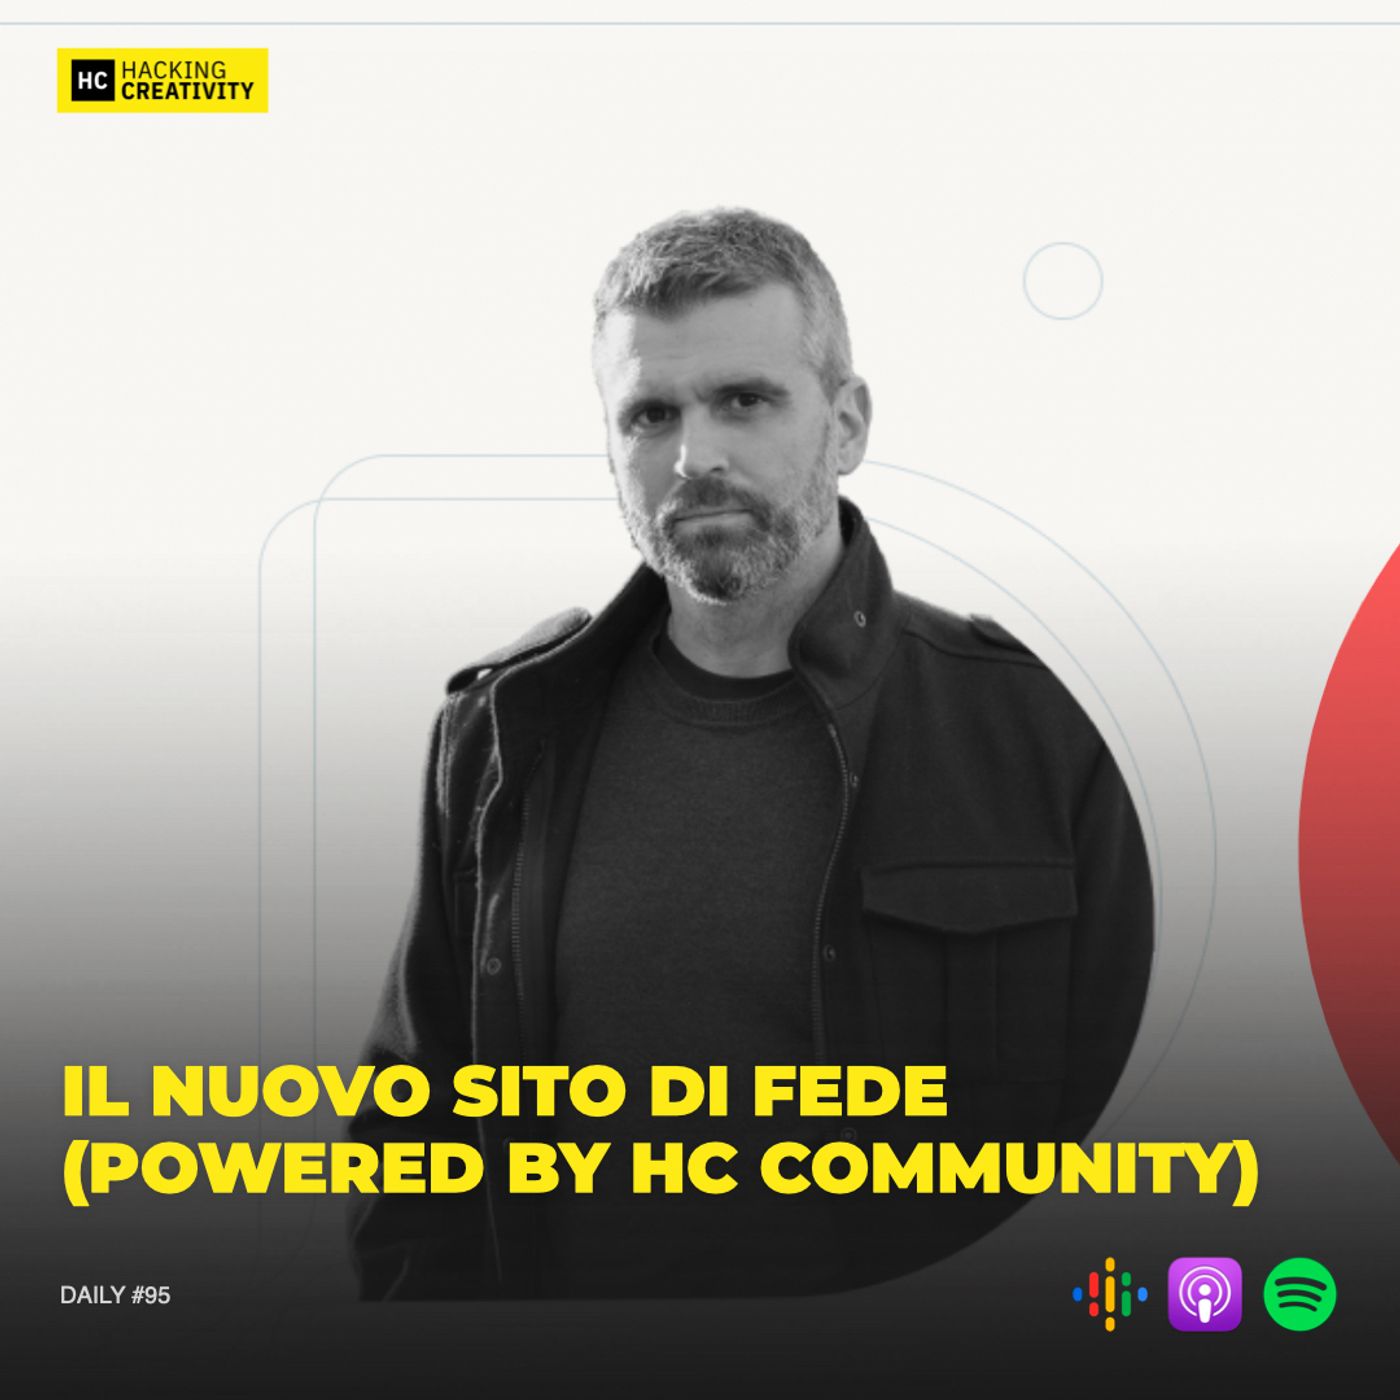 265 - Il nuovo sito di Fede (powered by HC Community) (DAILY)